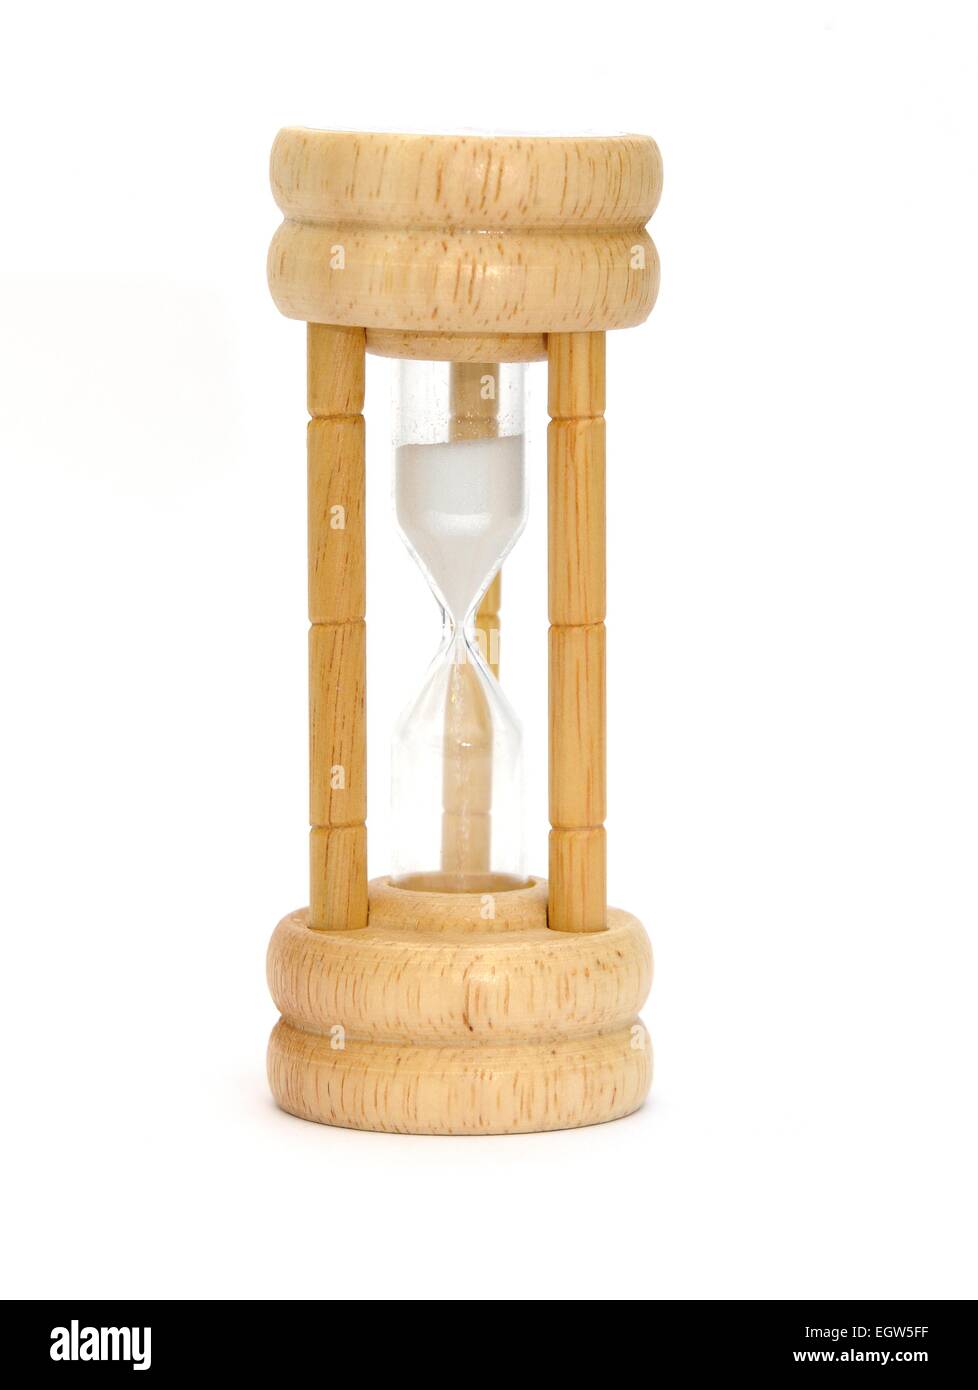 A traditional kitchen 3 minute egg timer Stock Photo